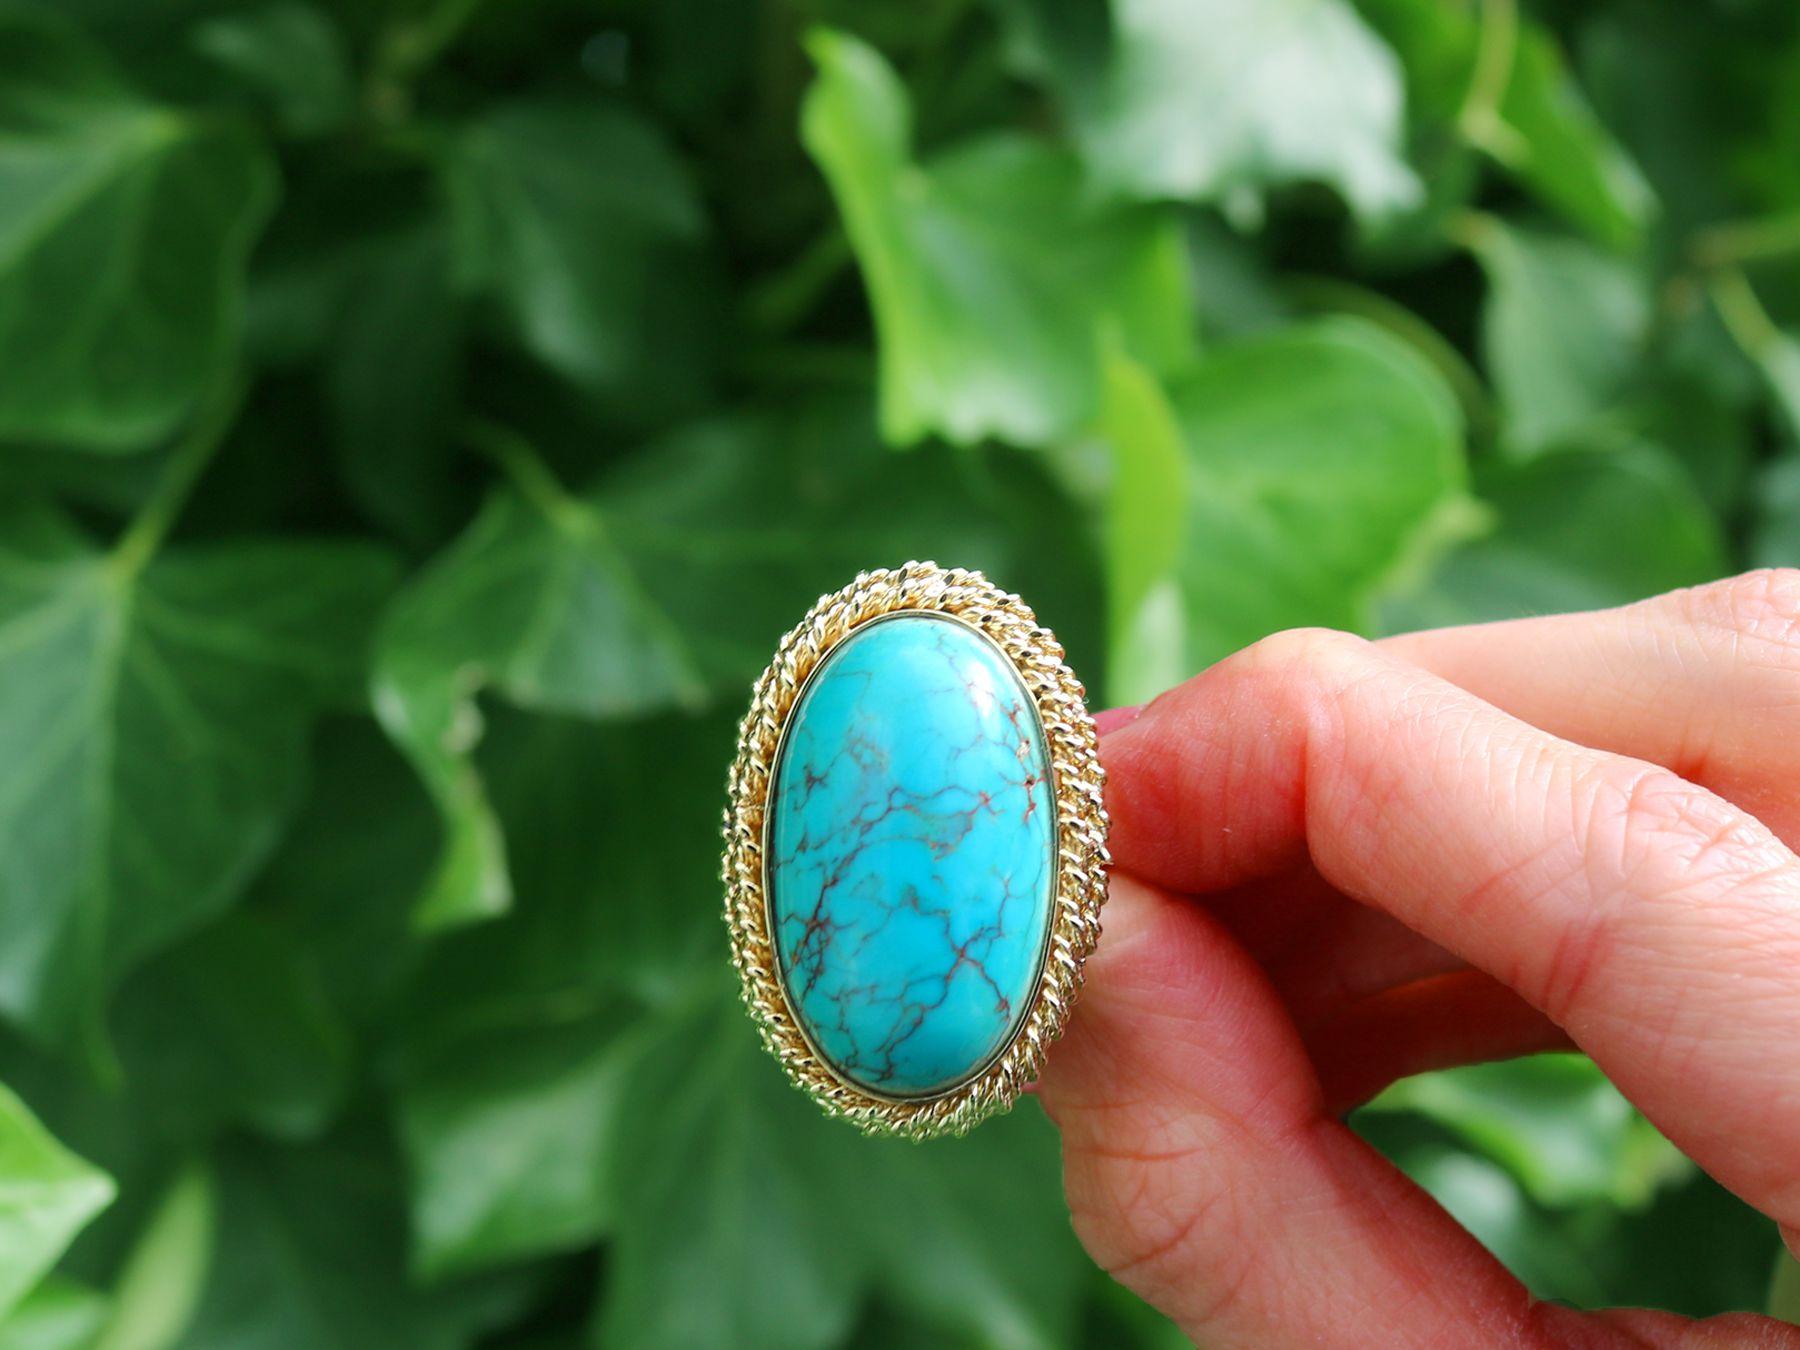 A stunning, fine and impressive 32.50 carat turquoise and 14 karat yellow gold cocktail ring; part of our vintage jewelry collections.

This stunning, fine and impressive vintage ring has been crafted in 14k yellow gold.

The pierced decorated mount